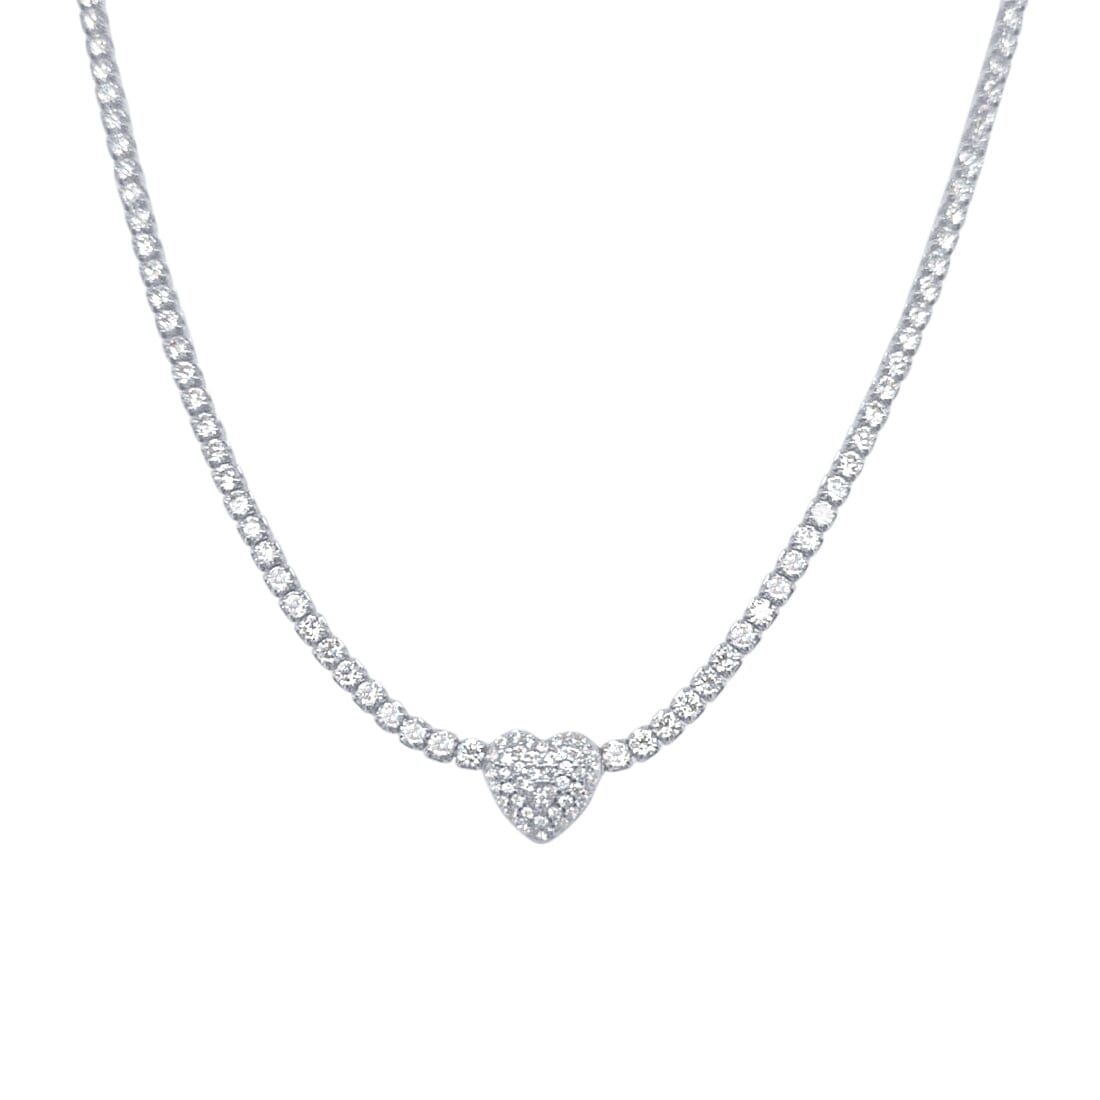 38cm Pave Heart Necklace with Cubic Zirconia in Sterling Silver Necklaces Bevilles 